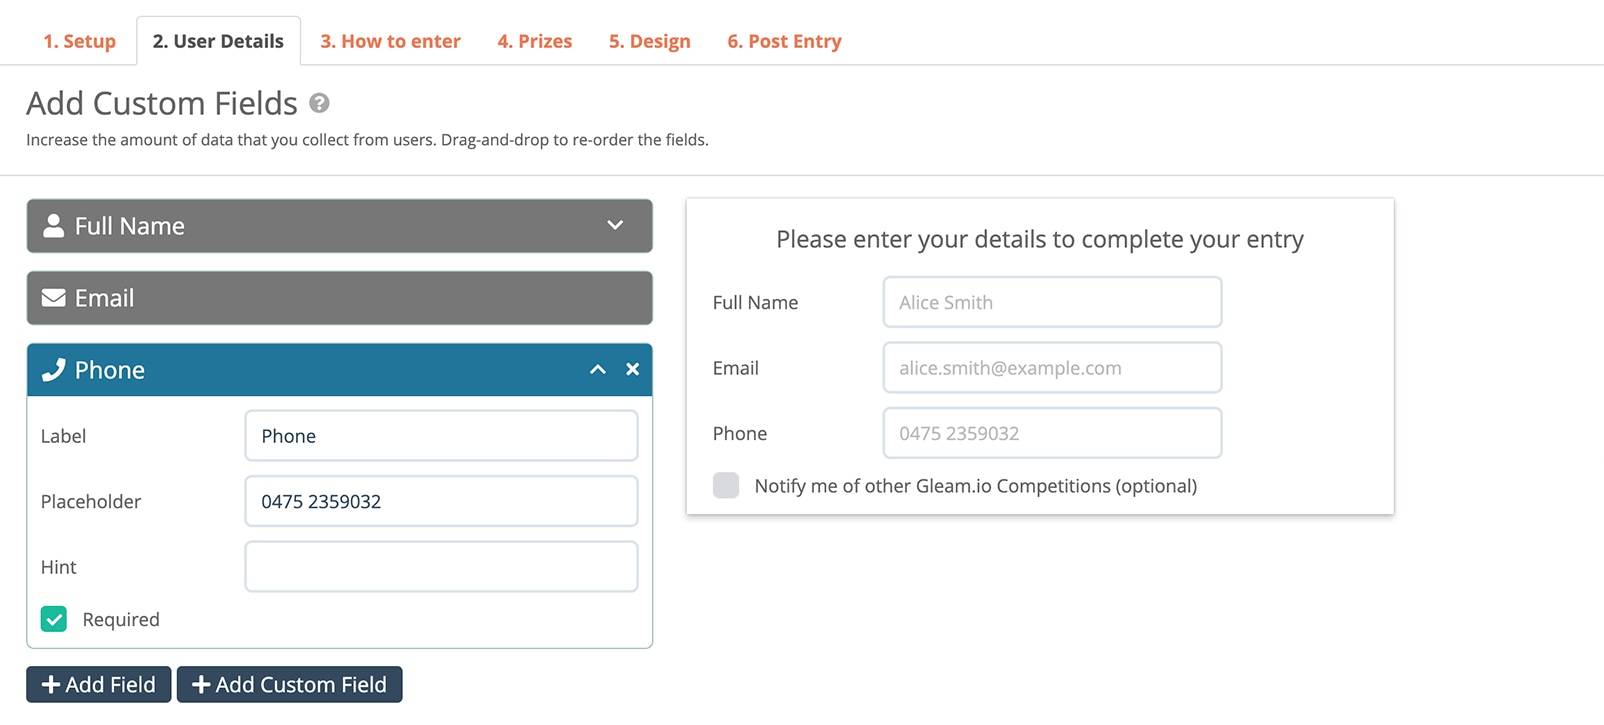 Add Phone Number Field to Gleam User Details Form